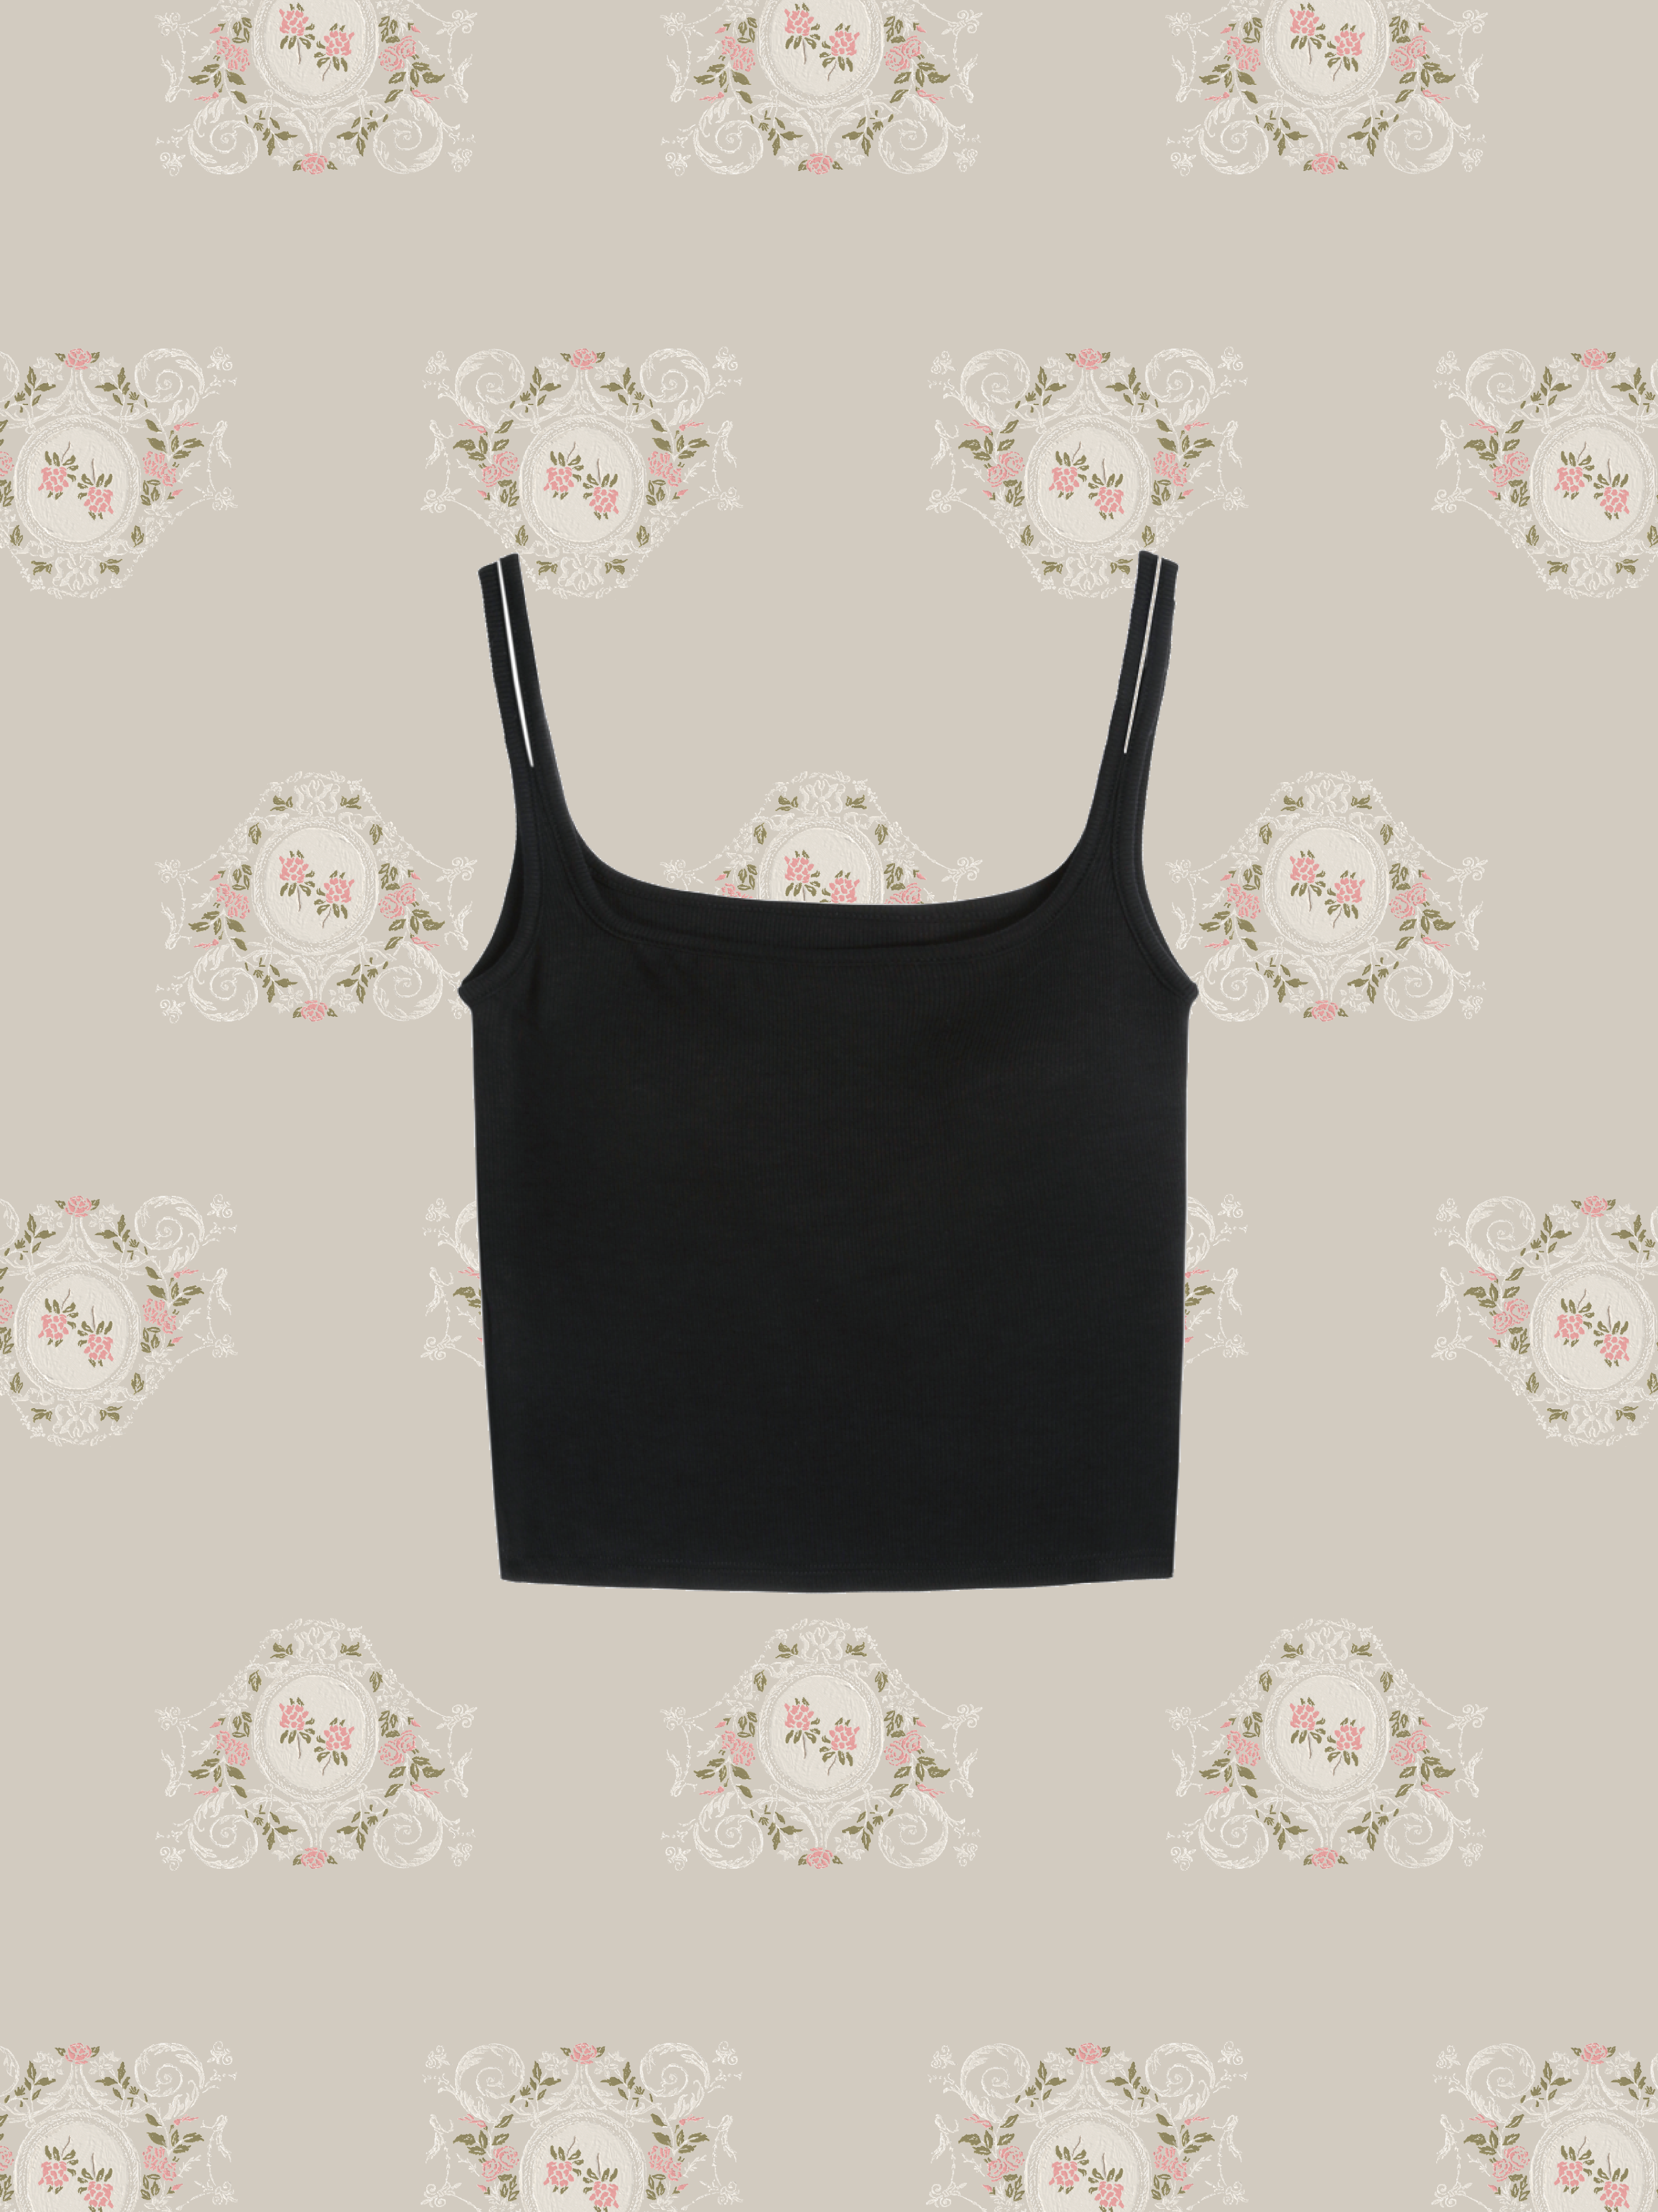 Cup In Sheer Cami/ブラ付きコットンキャミ